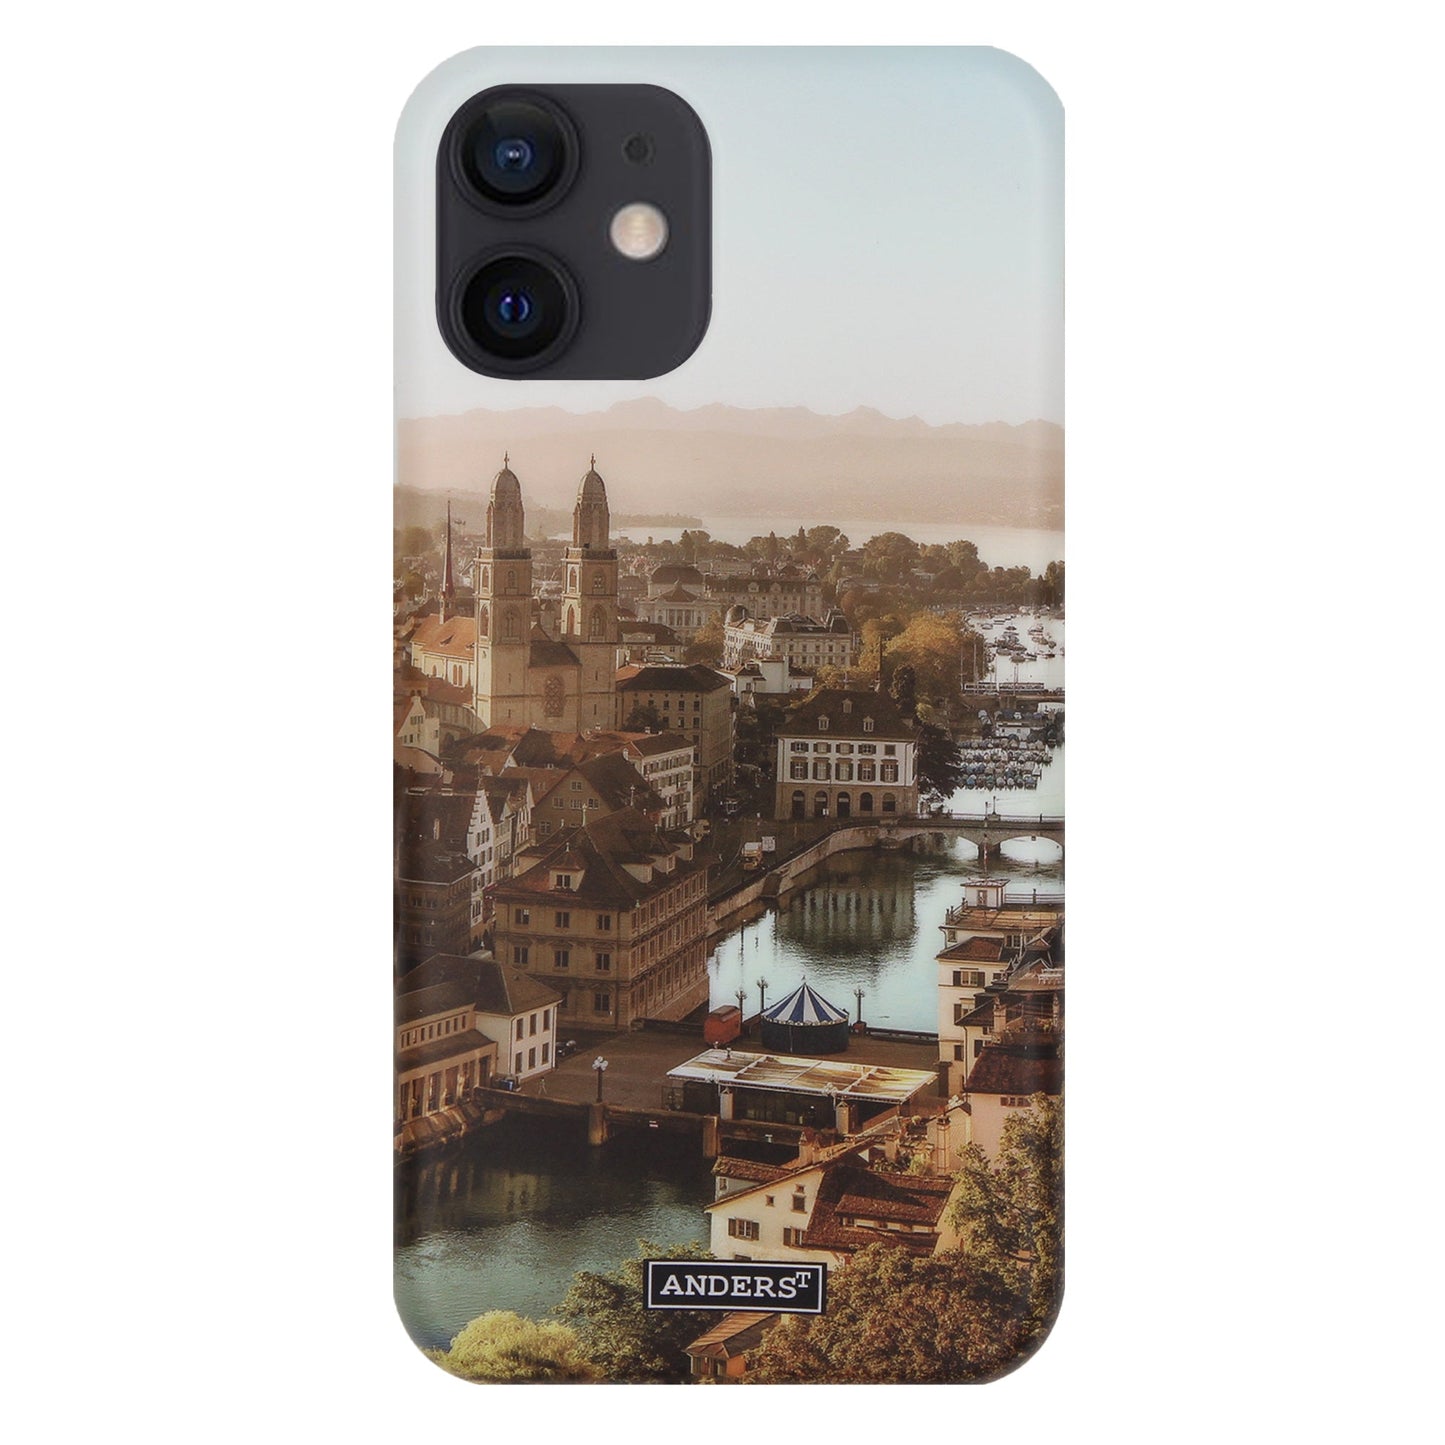 Zurich City from Above 360° Case for iPhone 11